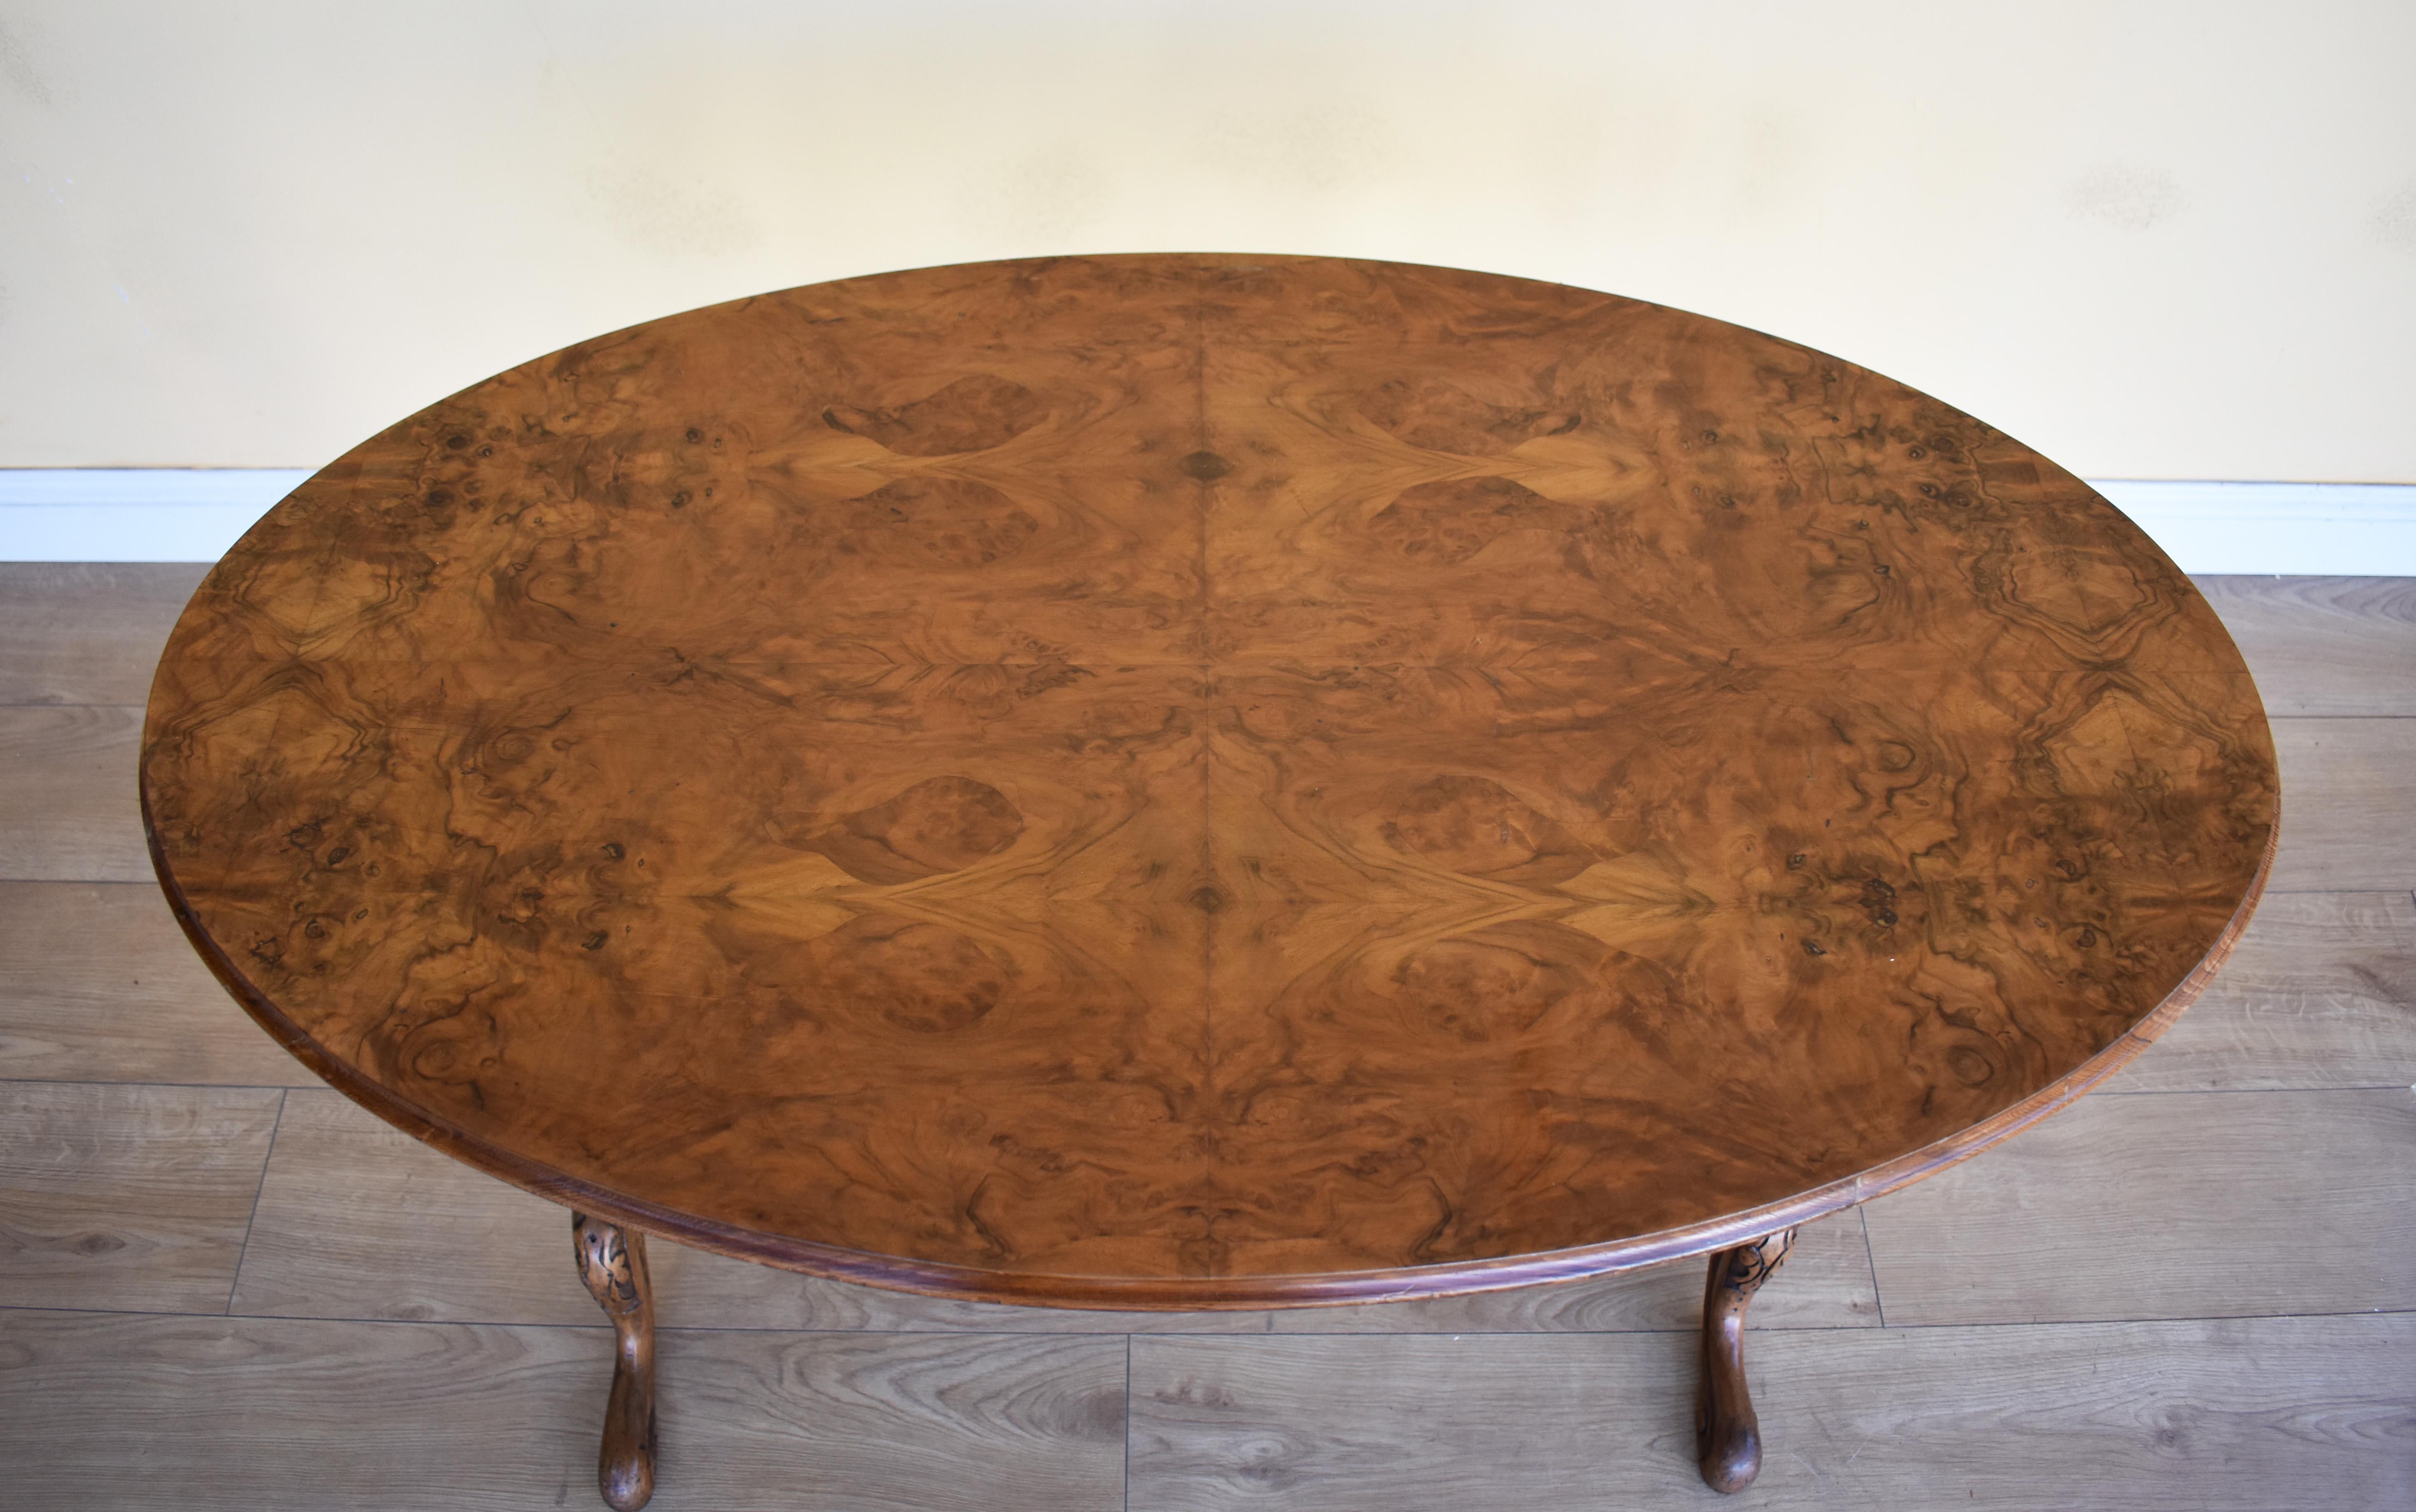 For sale is a fine quality 19th century Victorian burr walnut occasional table. The oval top, supported by two turned and carved columns, united by a stretcher, raised on elegantly carved feet. The table is in very good condition for its age.